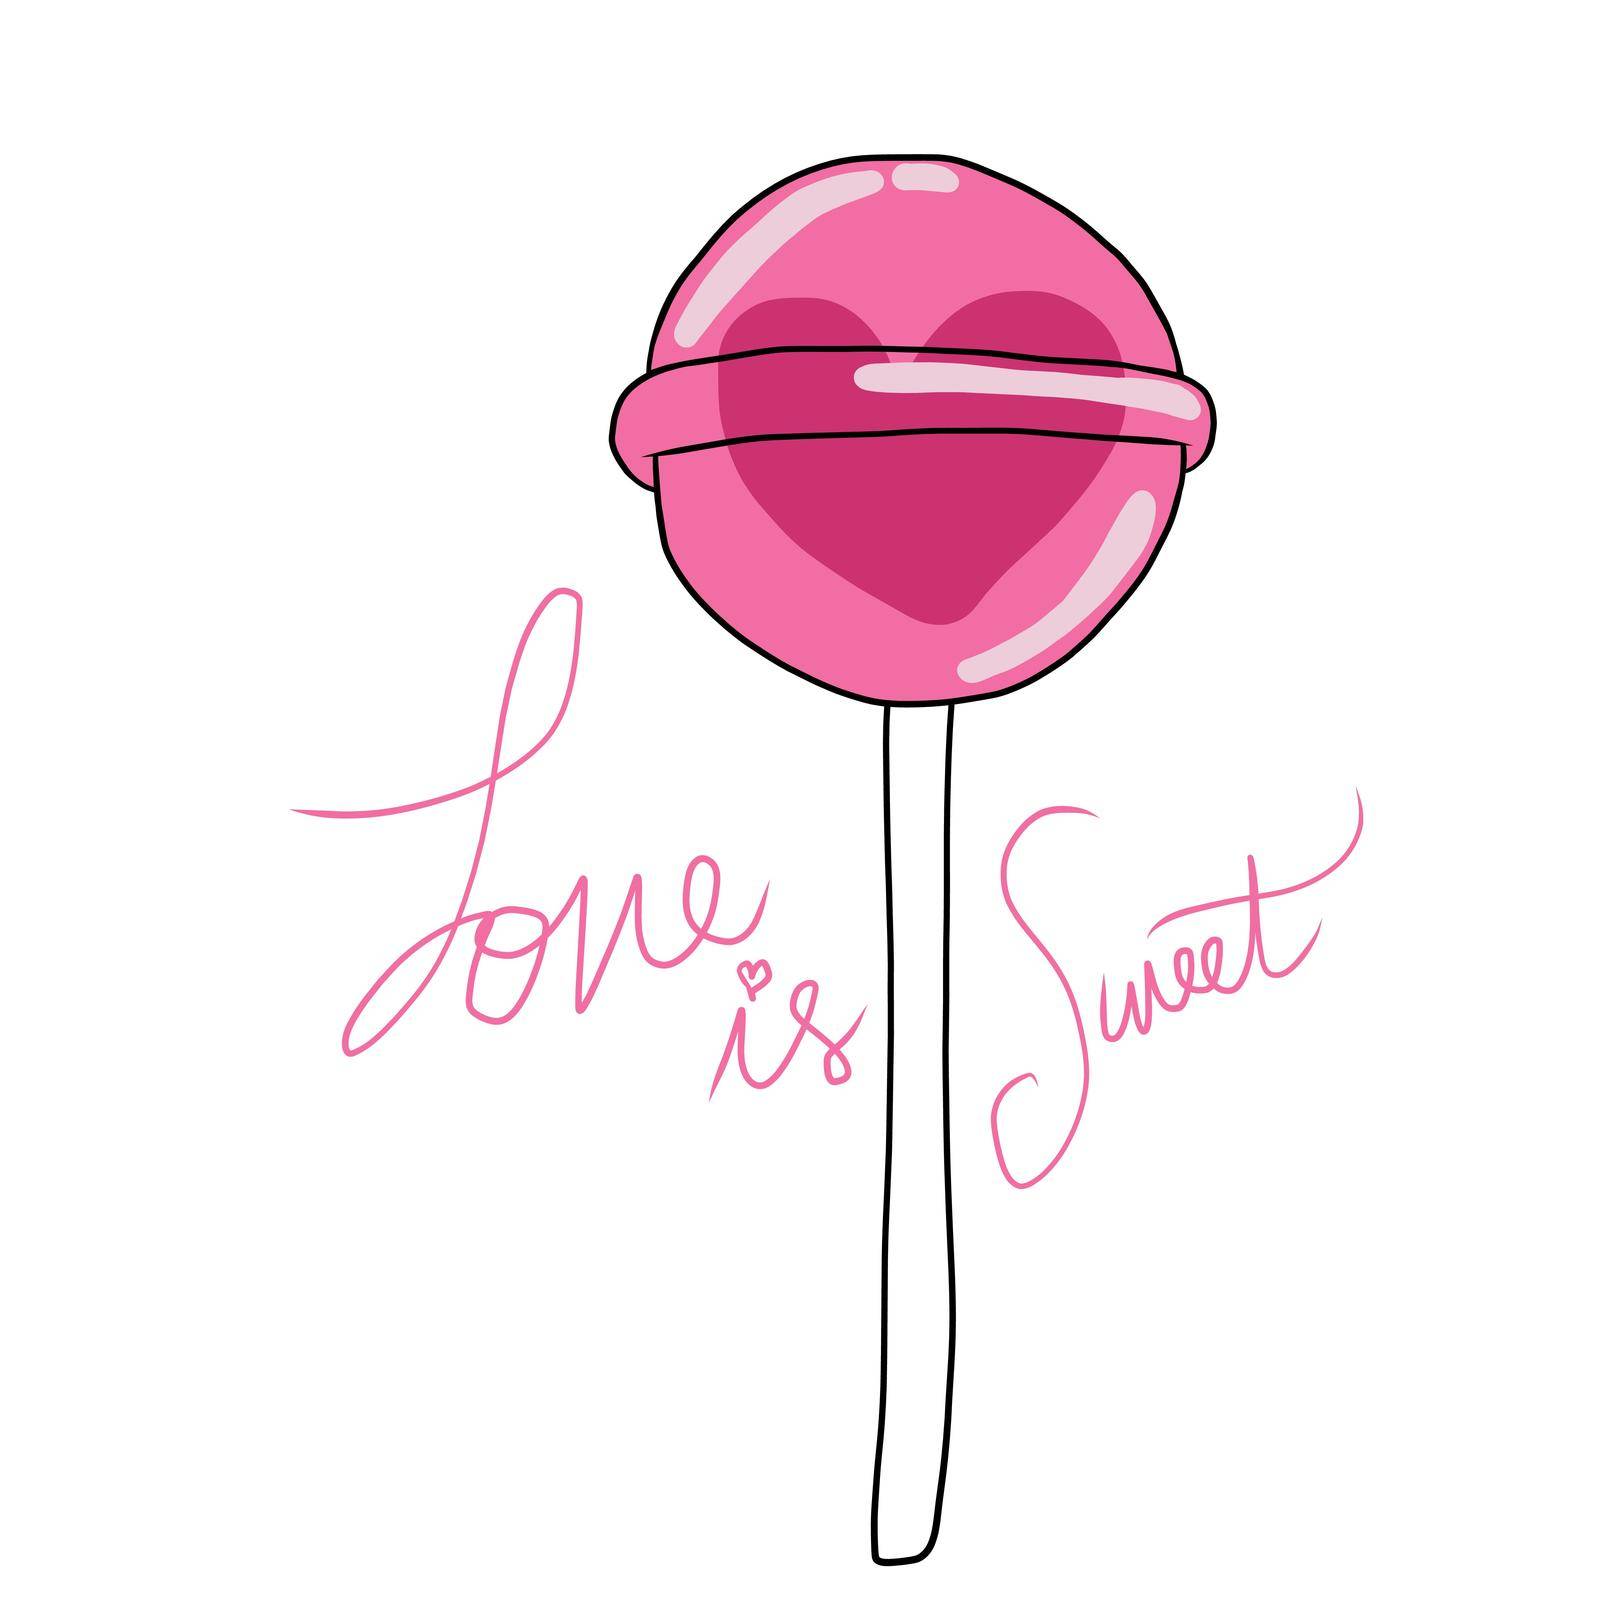 Love is sweet, candy with heart inside cartoon vector illustration